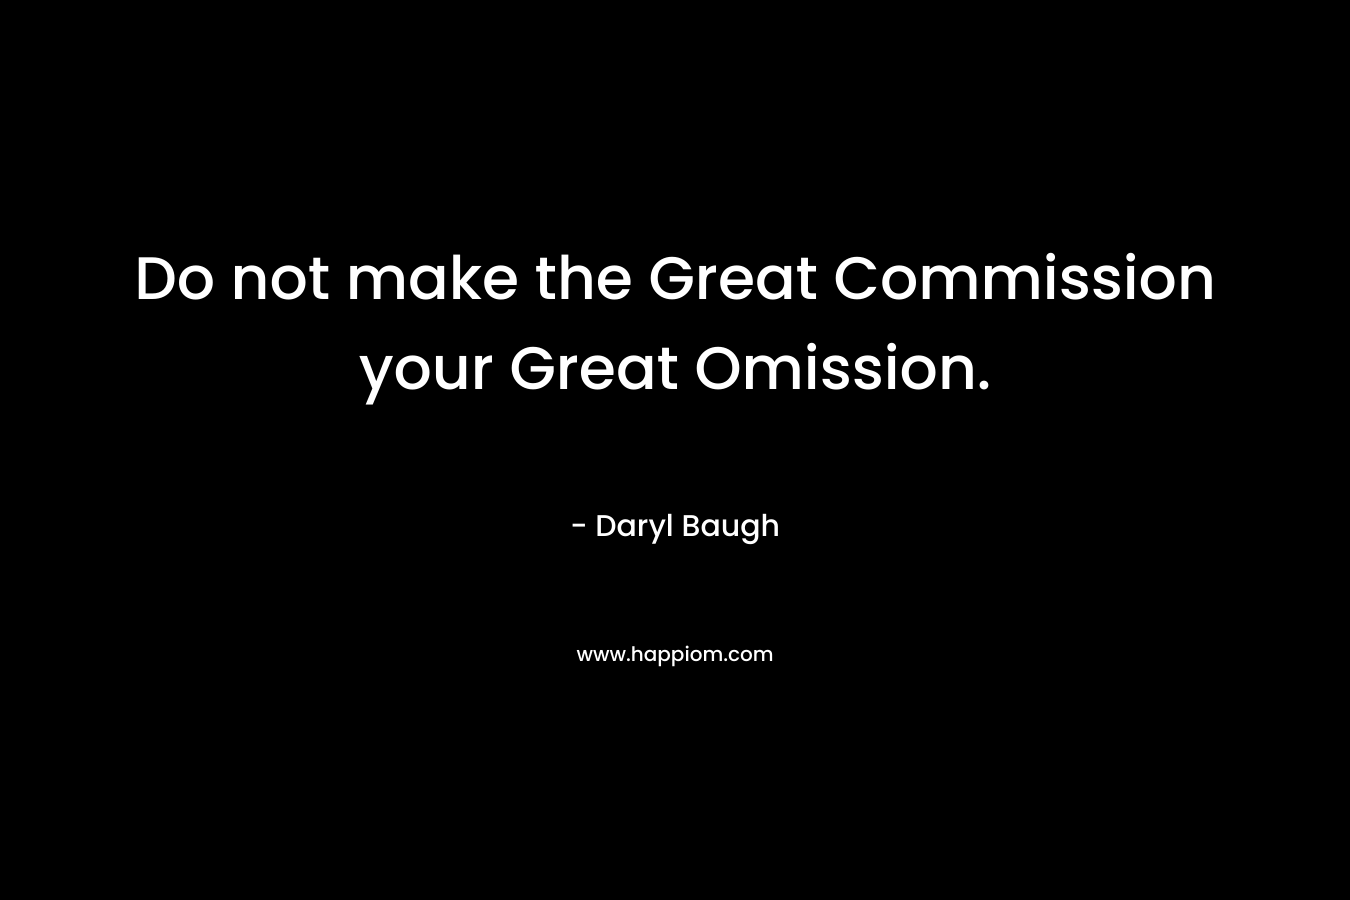 Do not make the Great Commission your Great Omission.